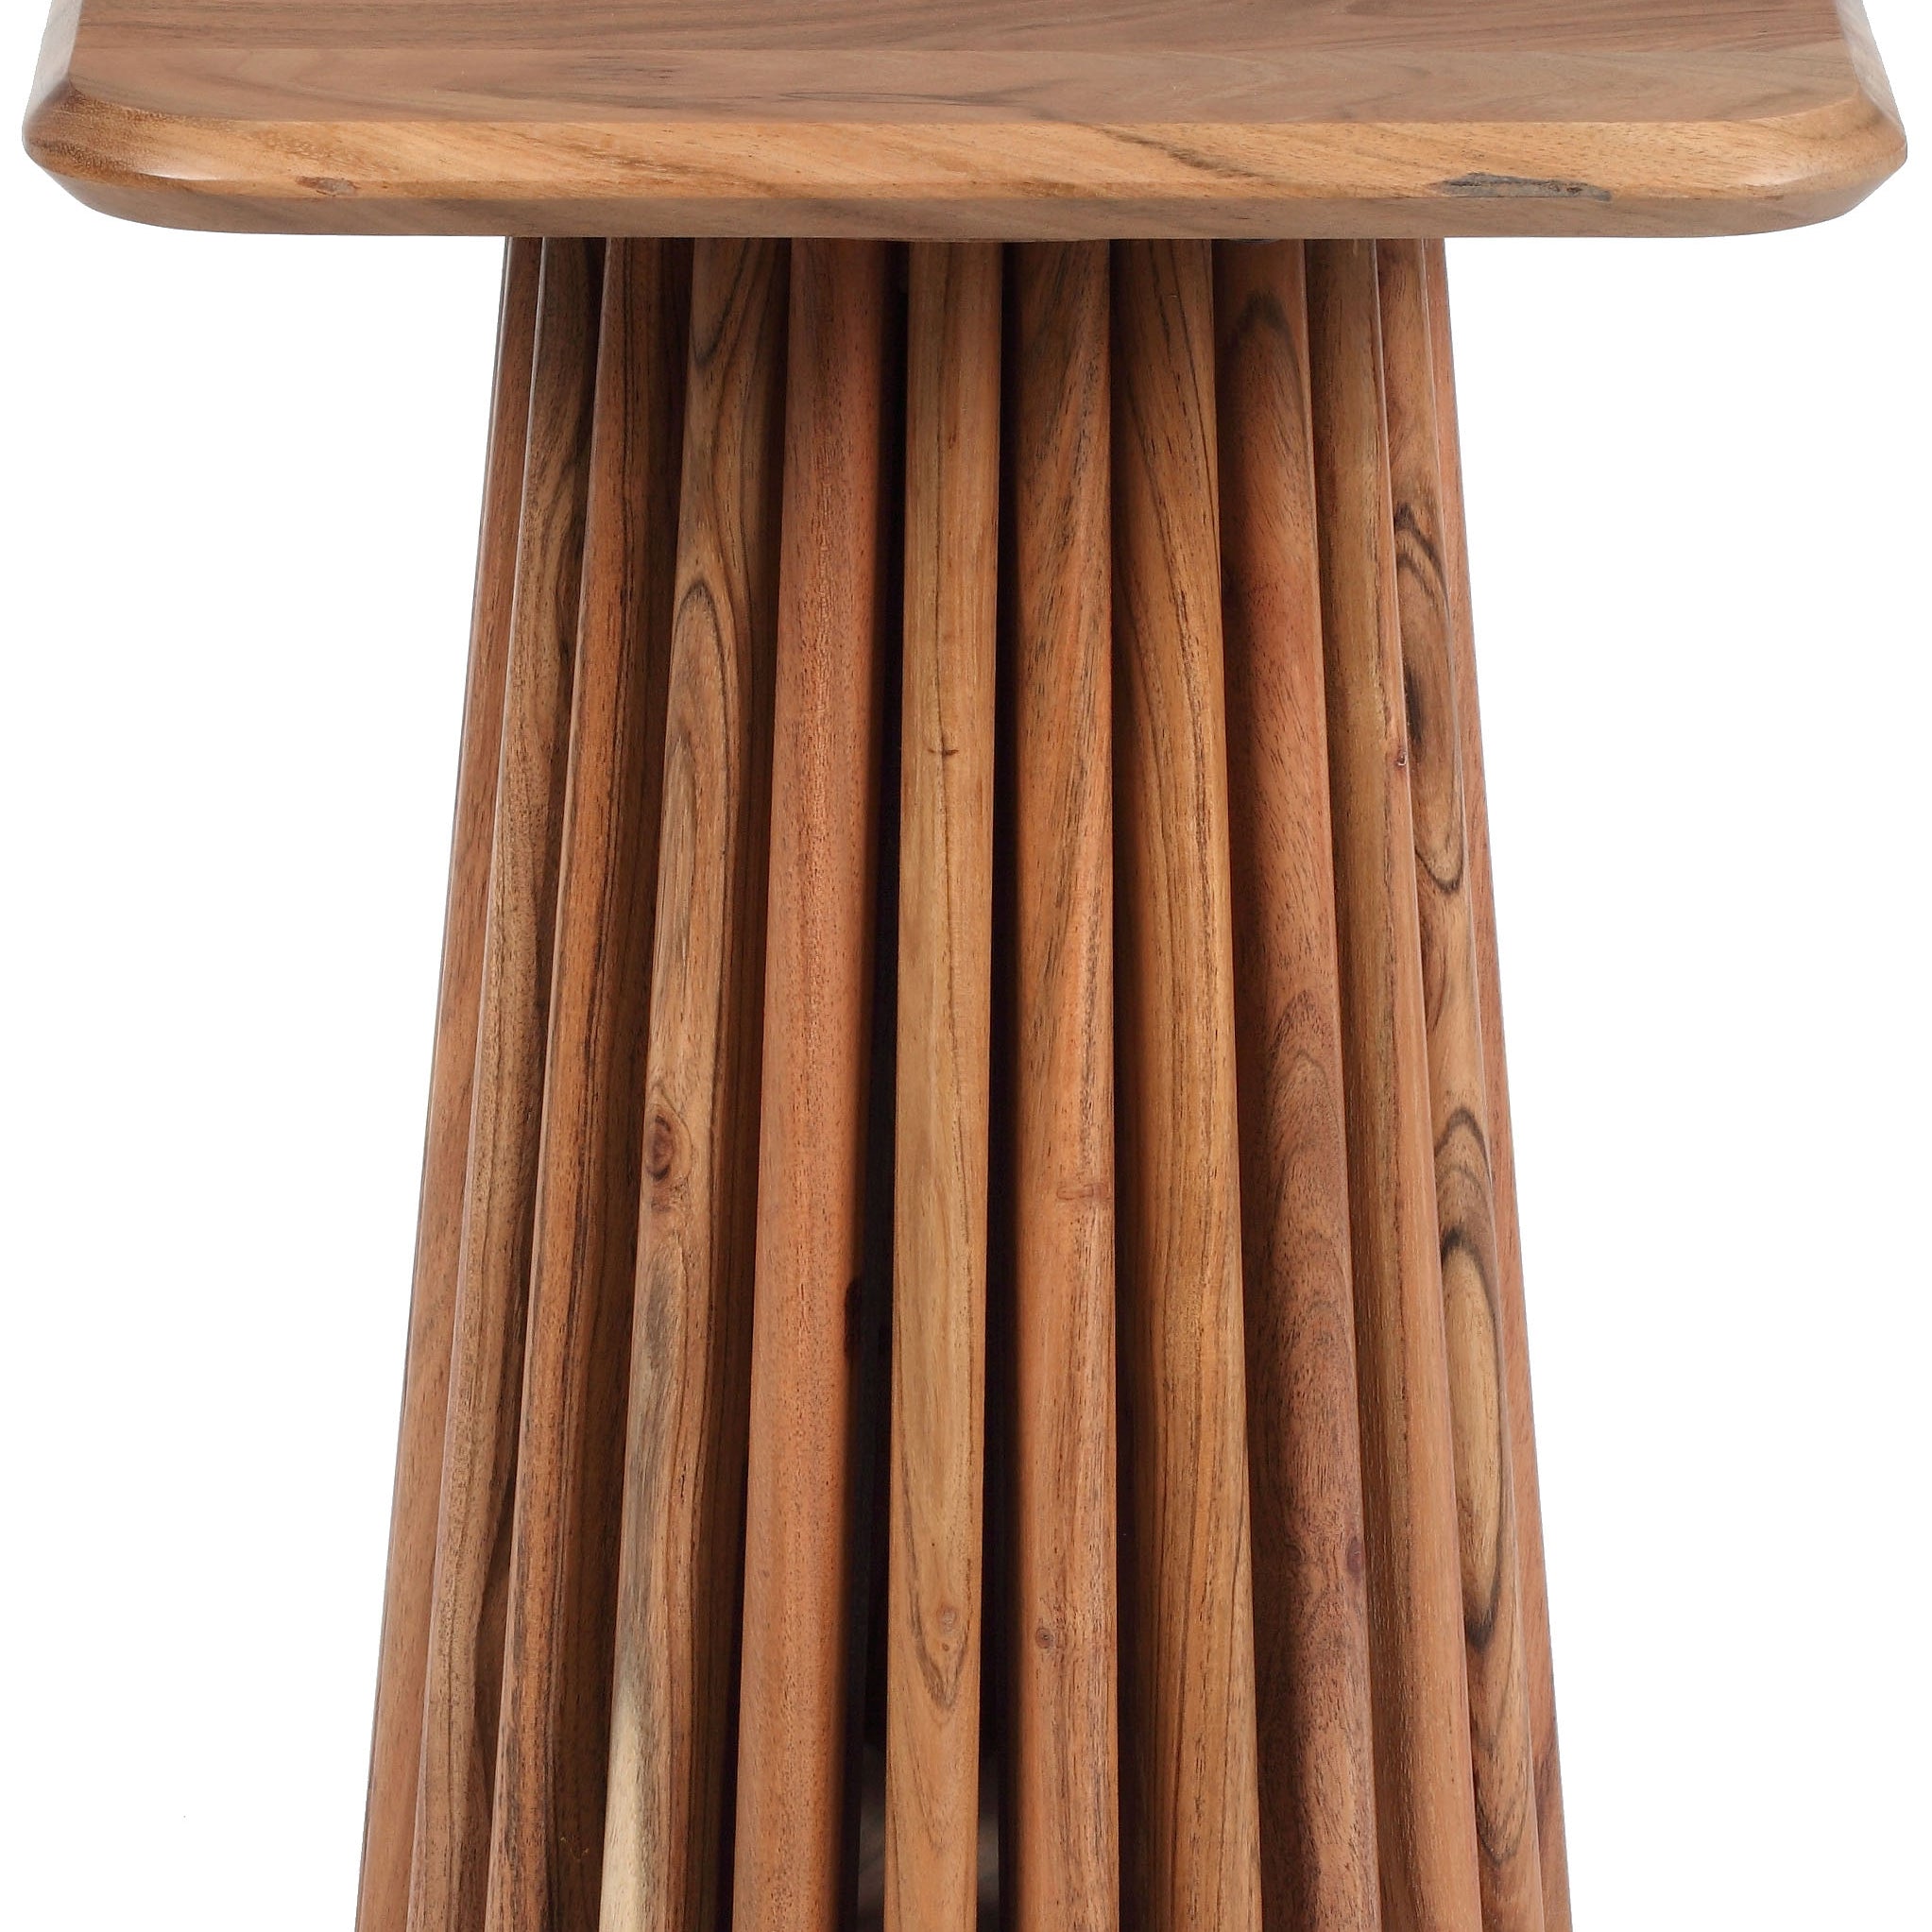 Safavieh Couture Penelope Wood Accent Table, SFV6406